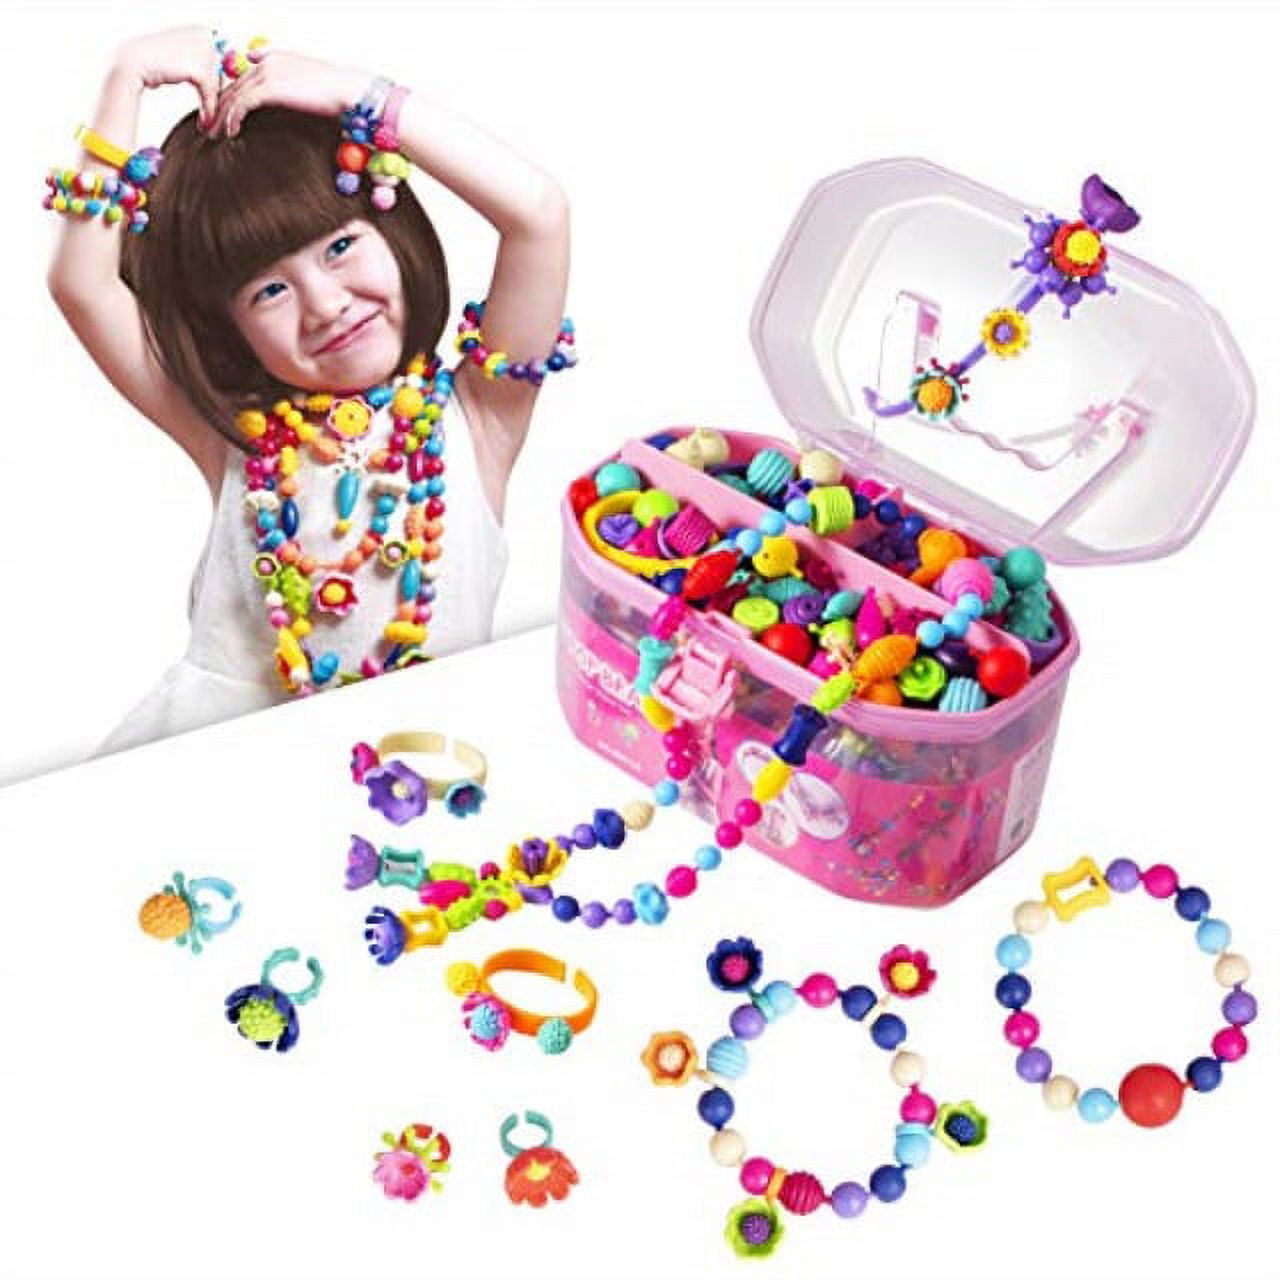 Gili Pop Beads Arts and Crafts Toys Gifts for Kids Age 4yr-8yr Jewelry Making Kit for 4 5 6 7 Year Old Girls Necklace and Bracelet